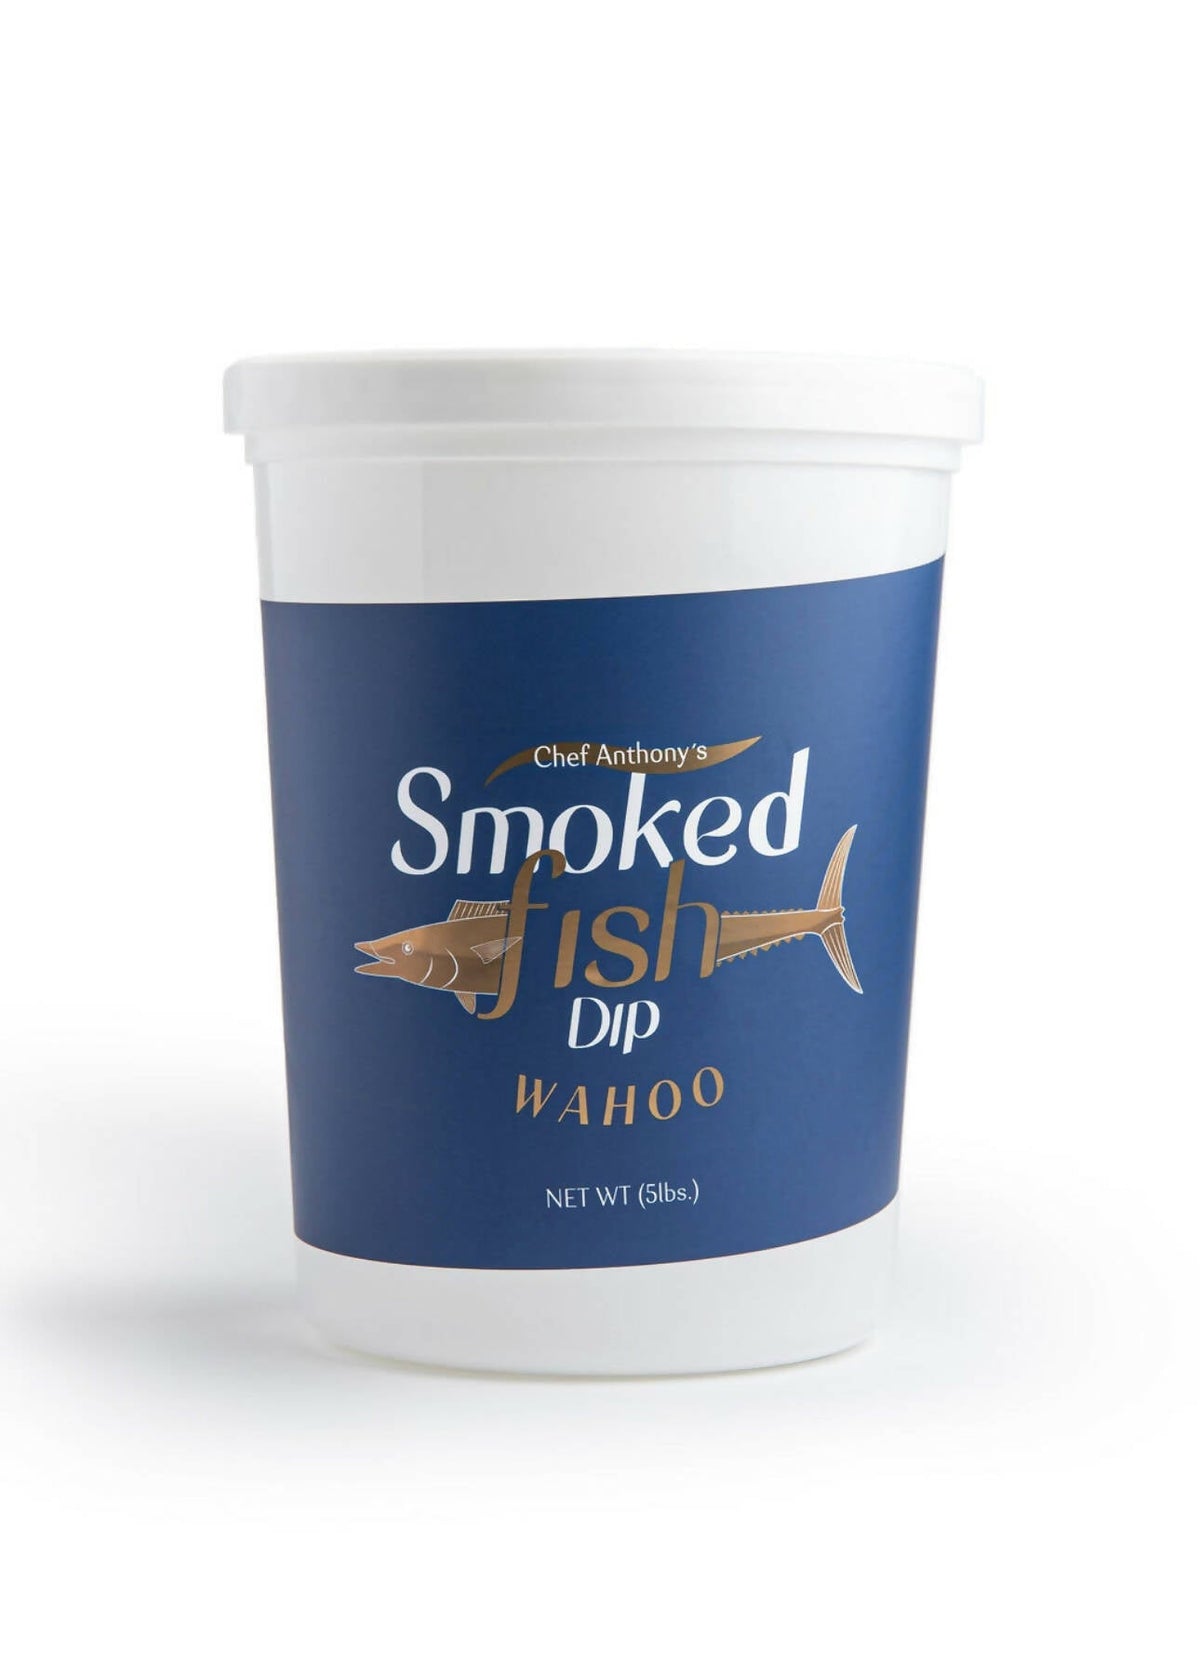 Chef Anthony's Smoked Fish Dip Buckets - 4 buckets x 5 LB by Farm2Me